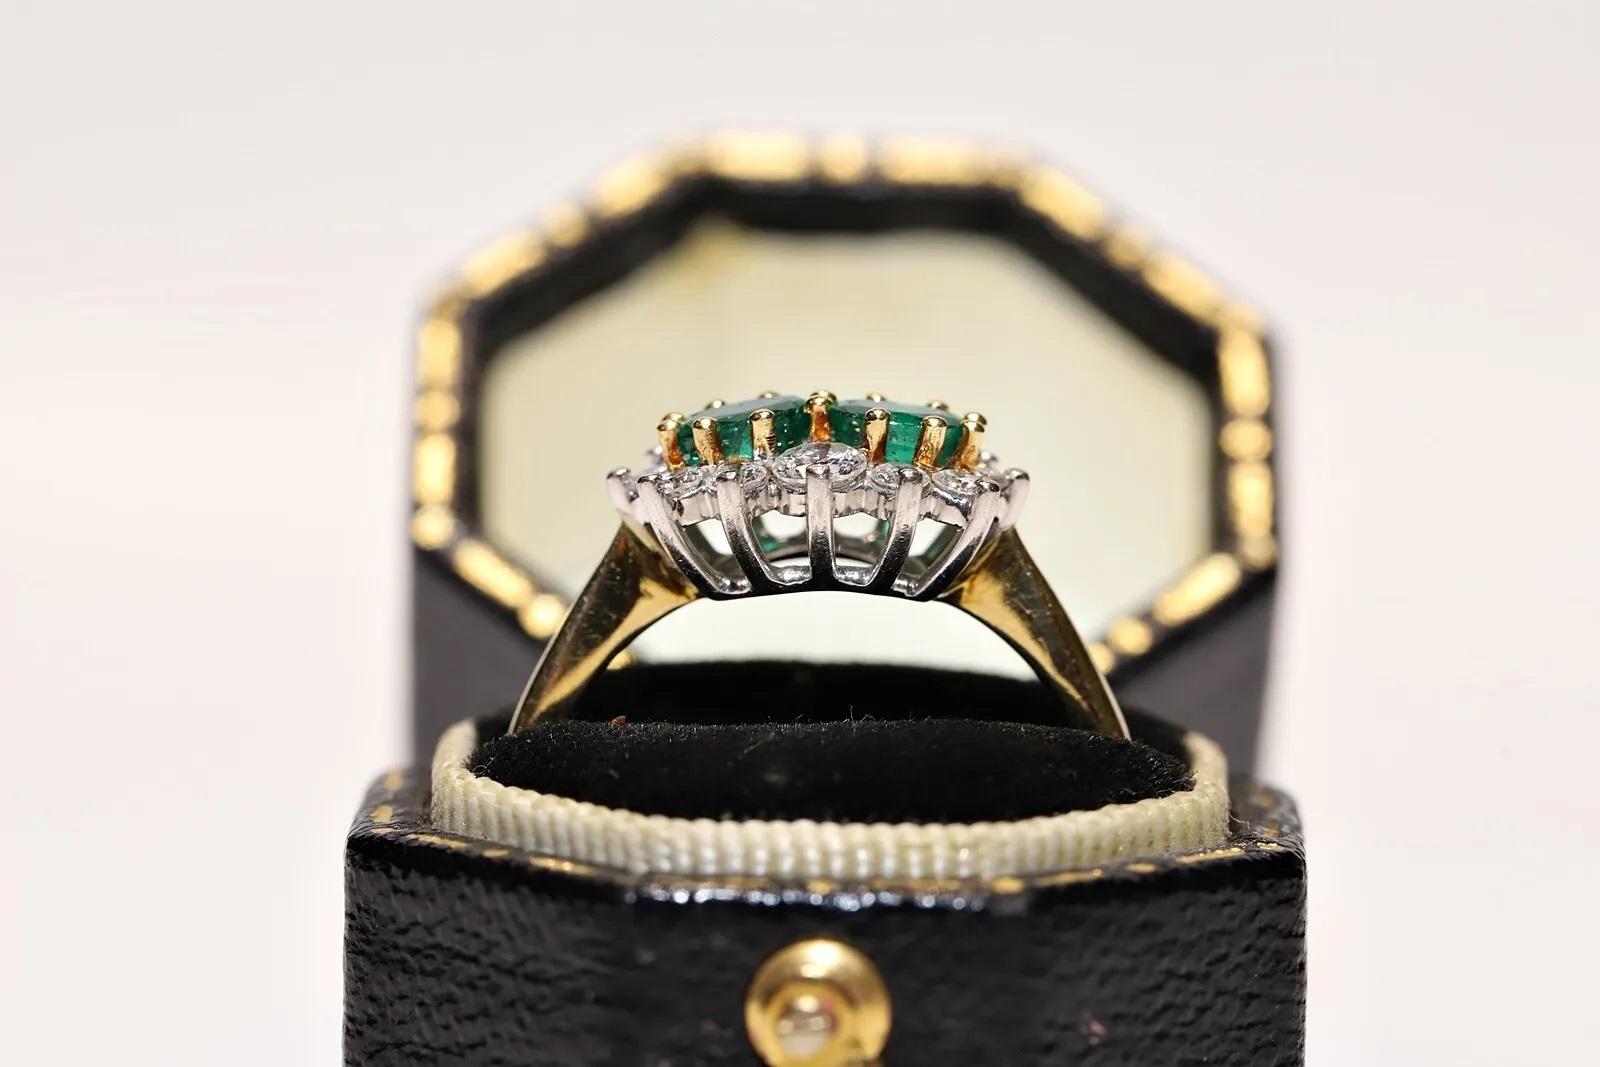 In very good condition.
Total weight is 3.4 grams.
Totally is diamond about 0.30 carat.
The diamond is has  G color and vs clarity.
Totally is emerald 0.70 carat.
Ring size is US 7.4 (We offer free resizing)
We can make any size.
Box is not